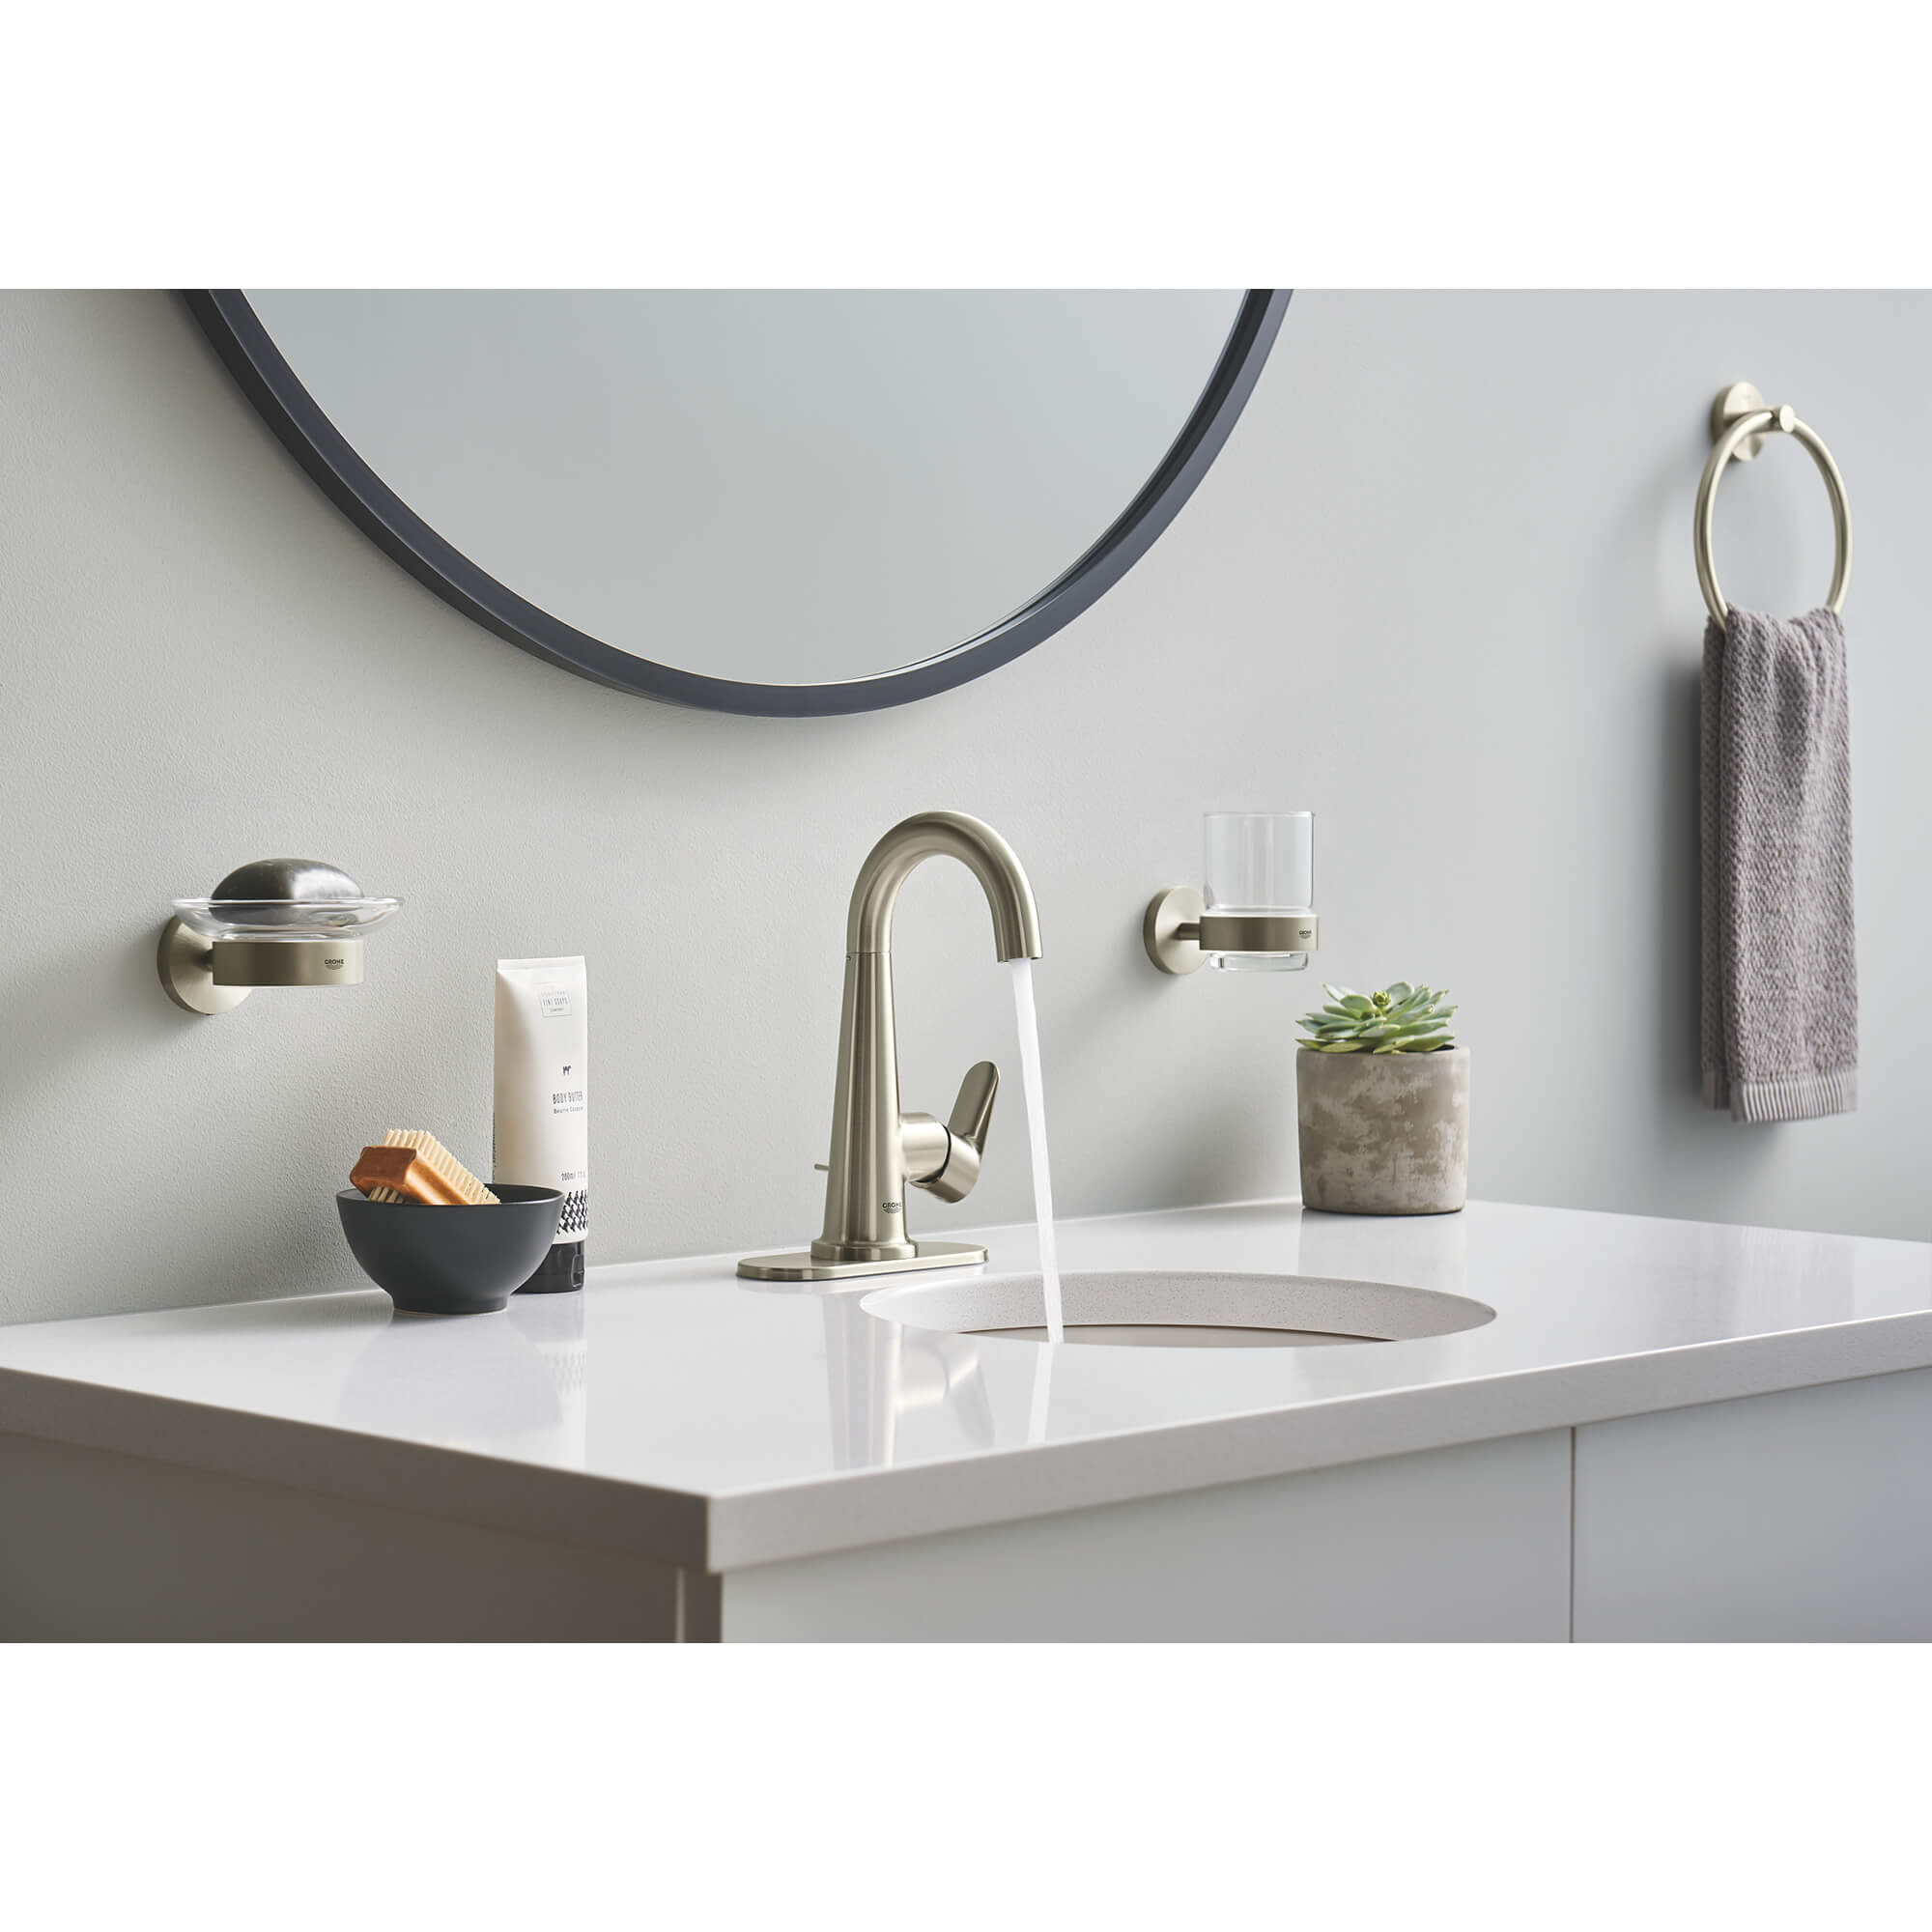 Glass with Holder GROHE BRUSHED NICKEL